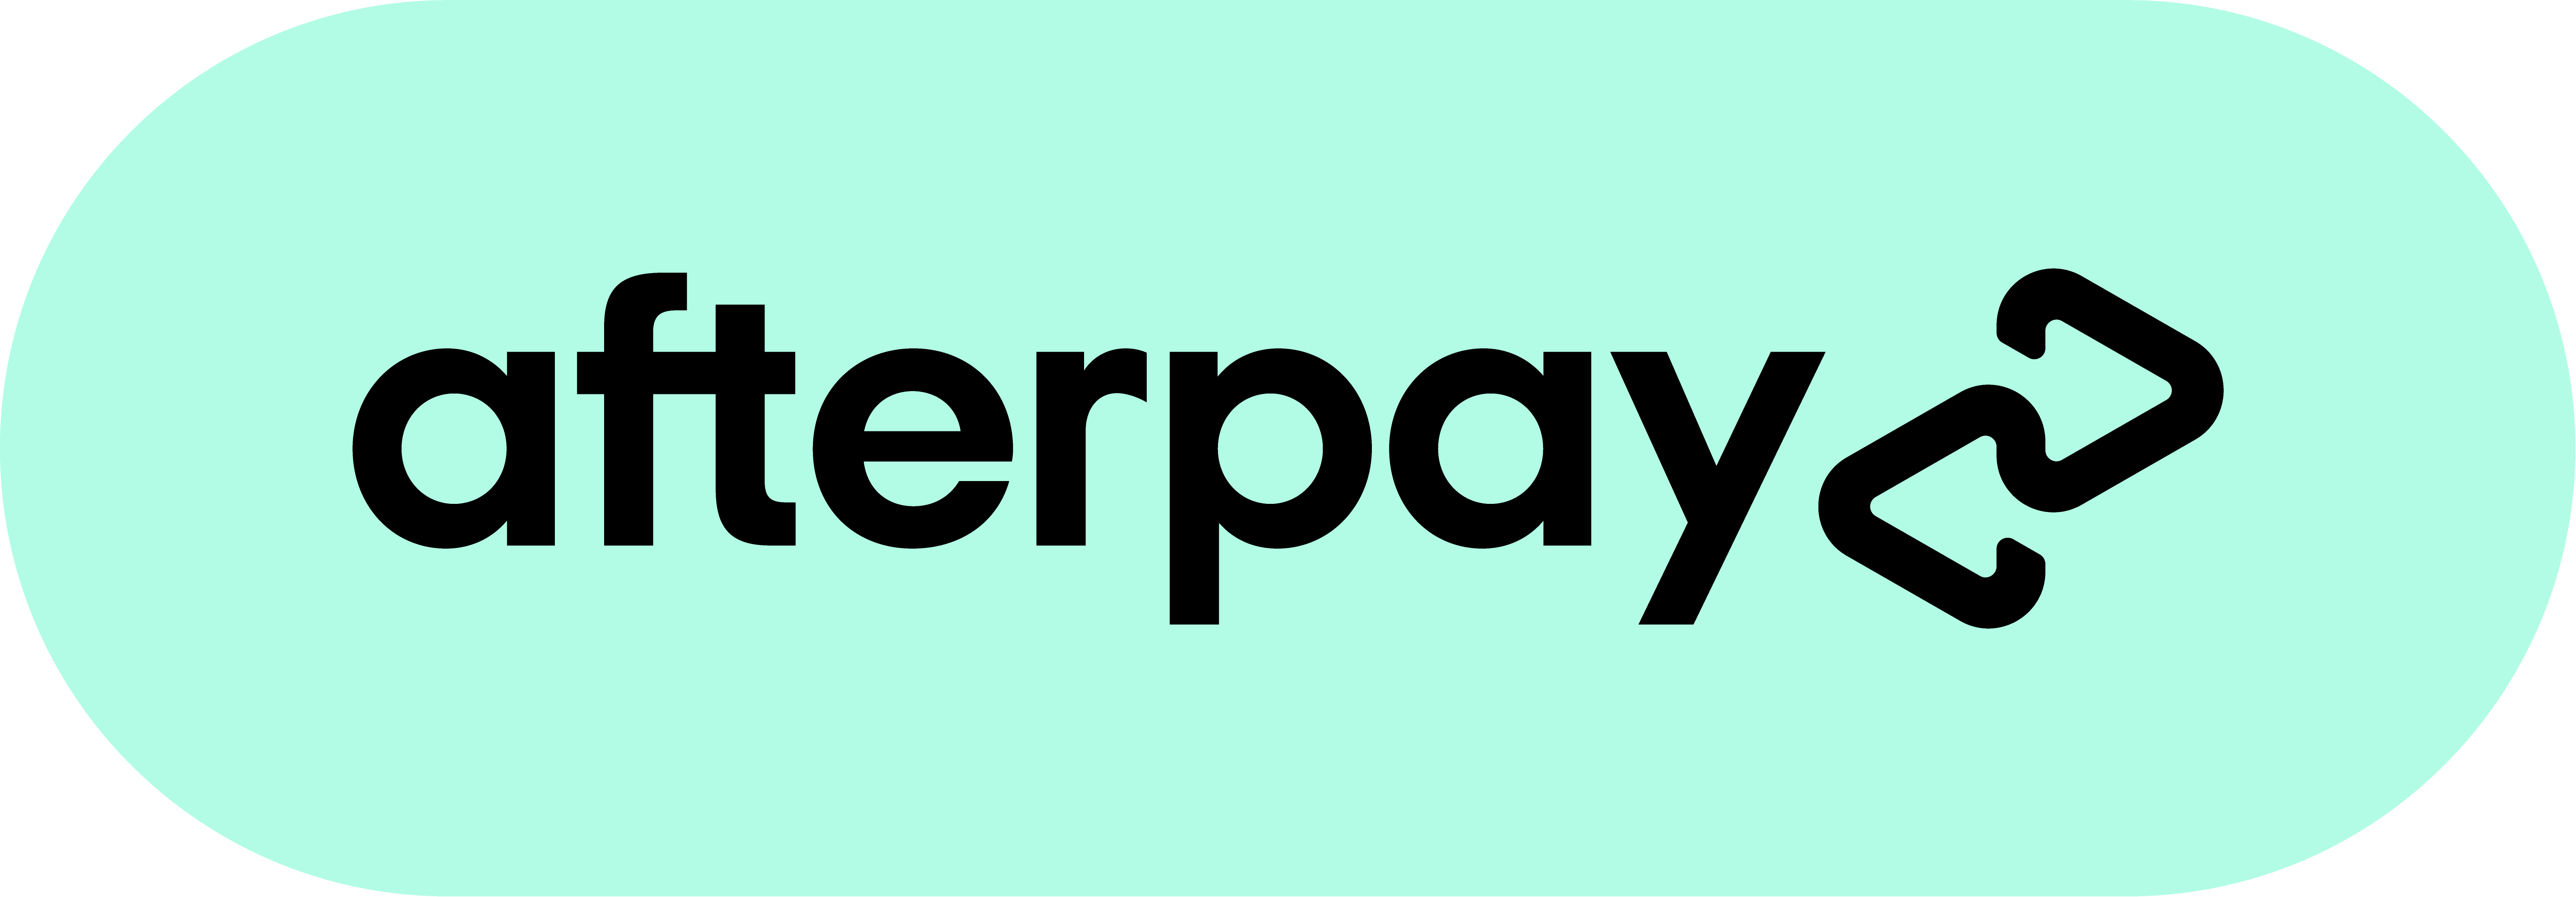 Afterpay Launches New Brand Campaign 'Afterpay Where You Wouldn't